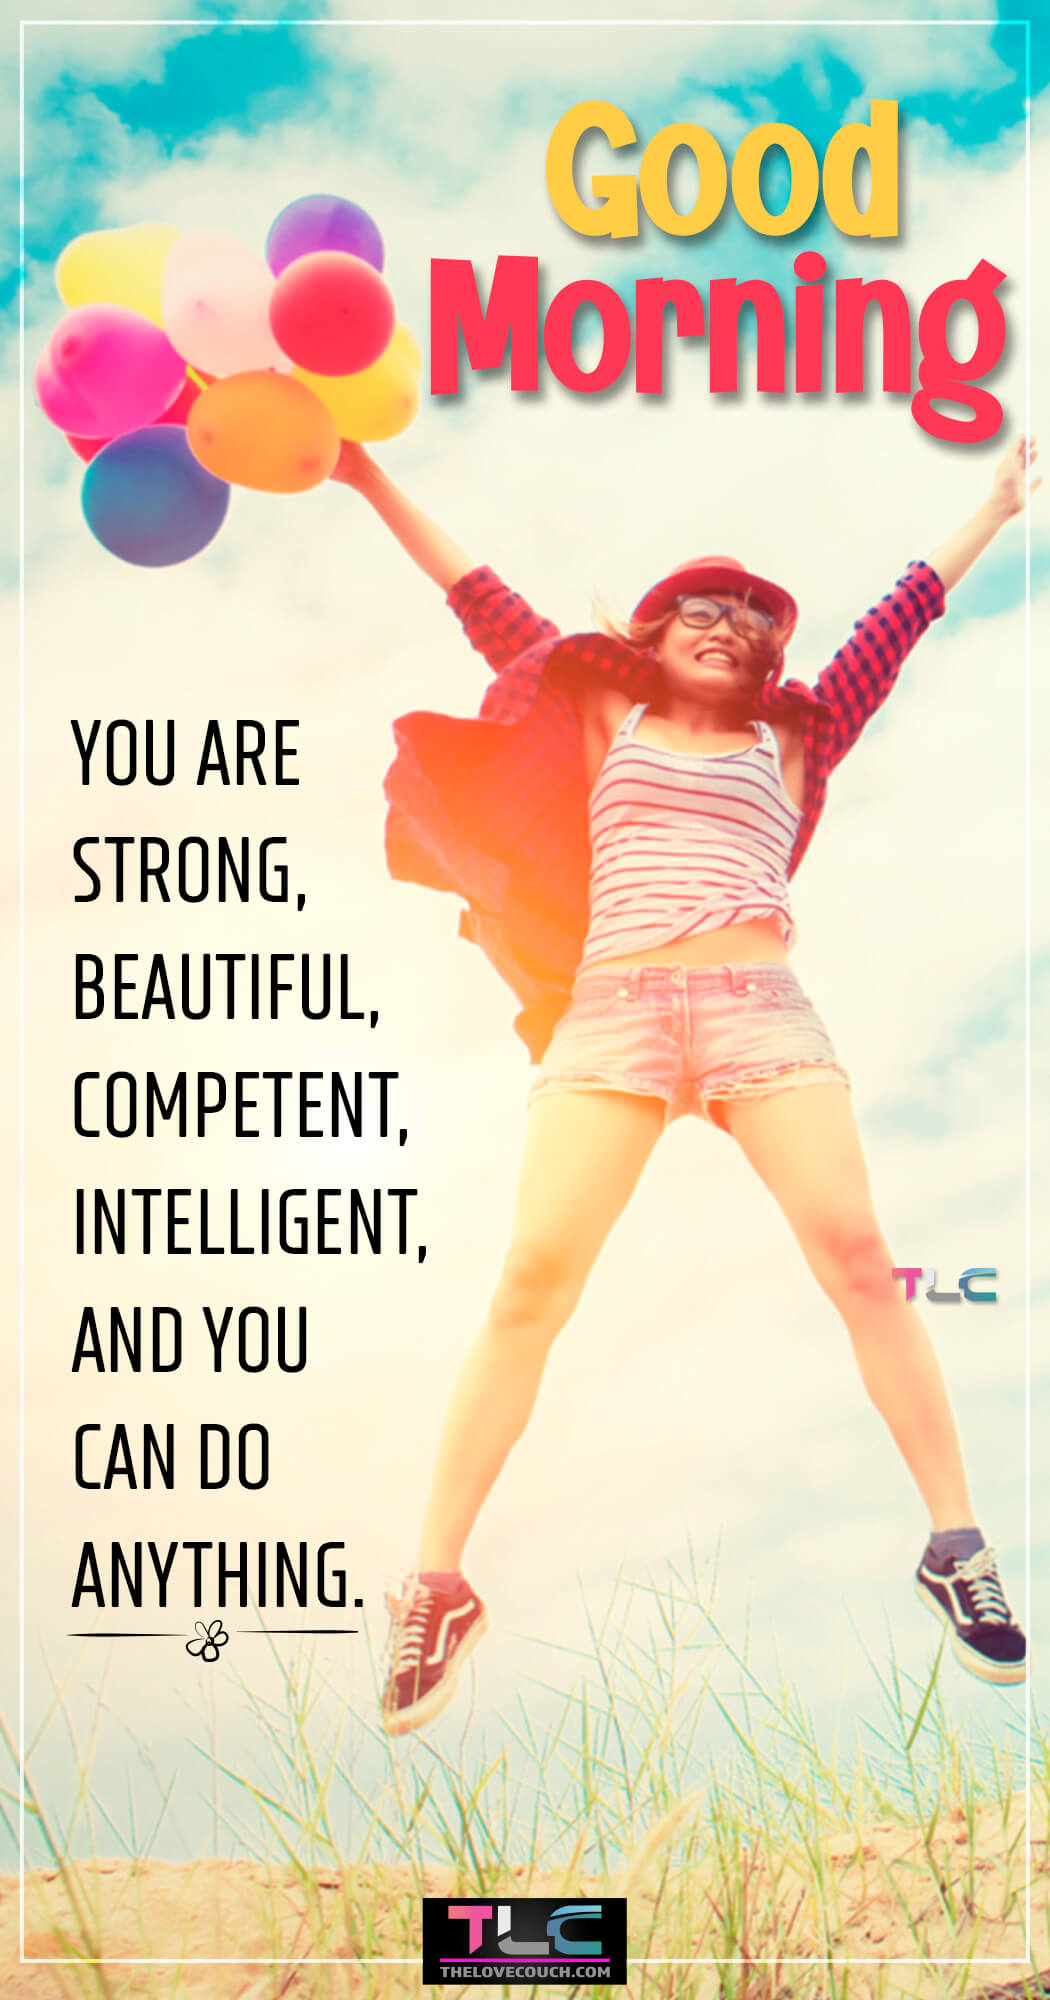 You are strong, beautiful, competent, intelligent, and you can do anything.